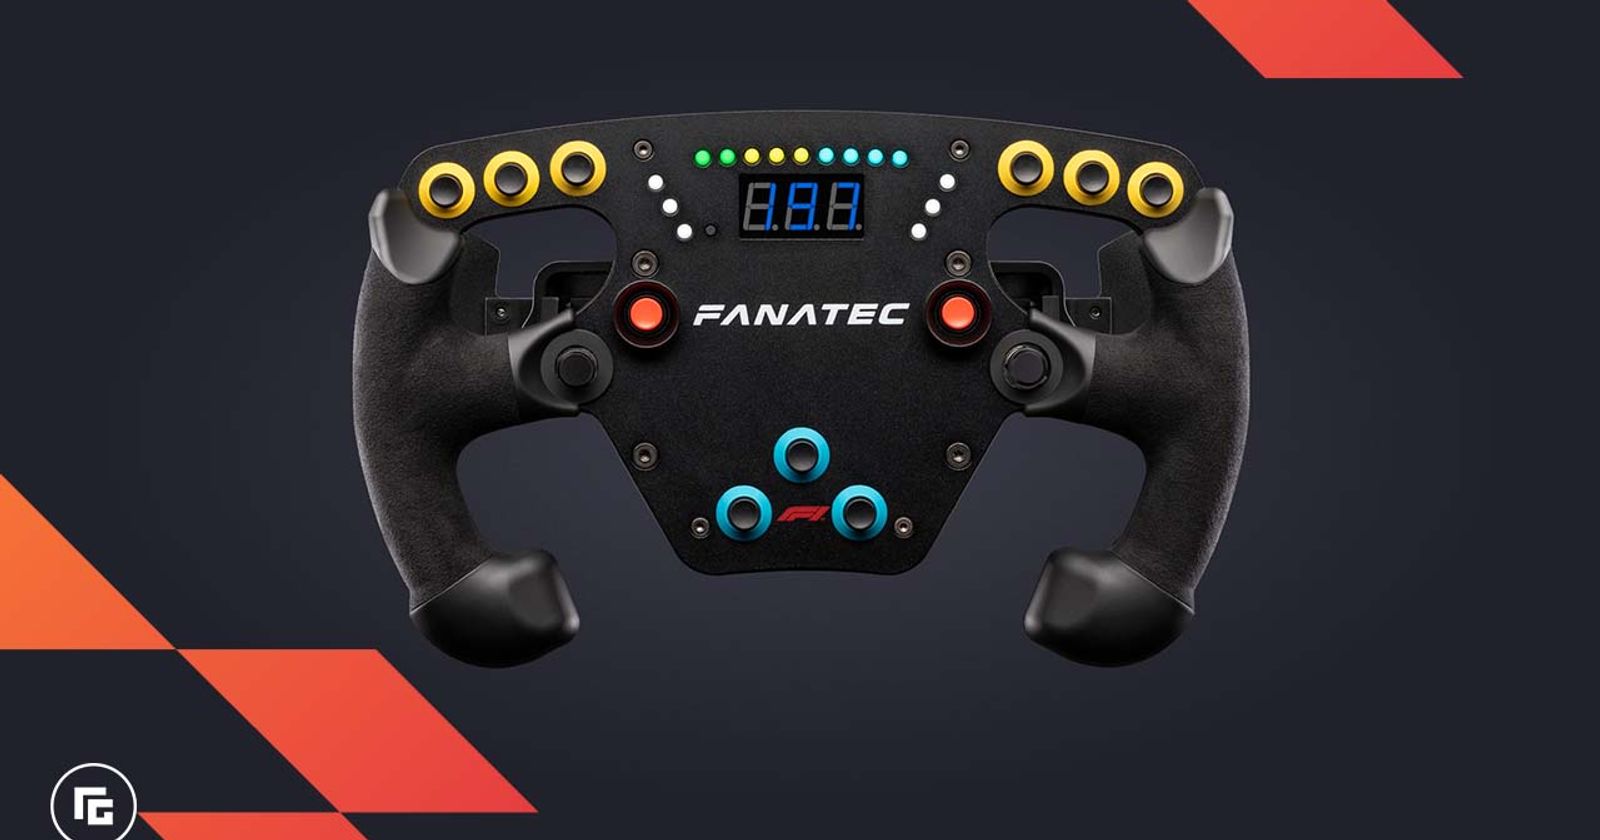 Fanatec's F1 Esports is available order